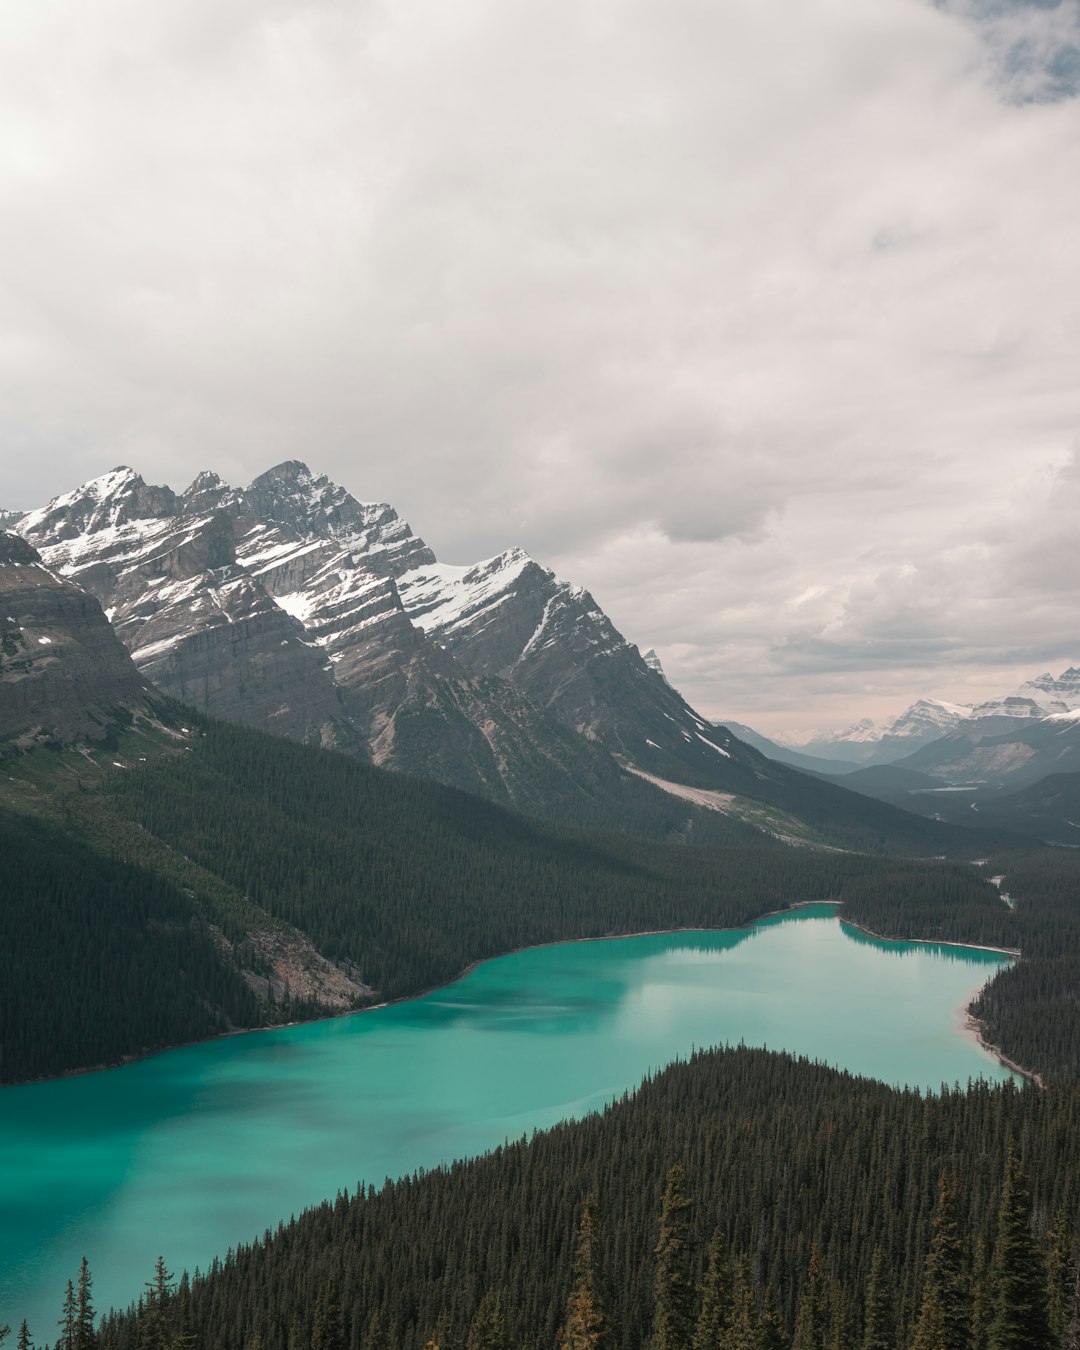 Travel Tips and Stories of Peyto Peak in Canada